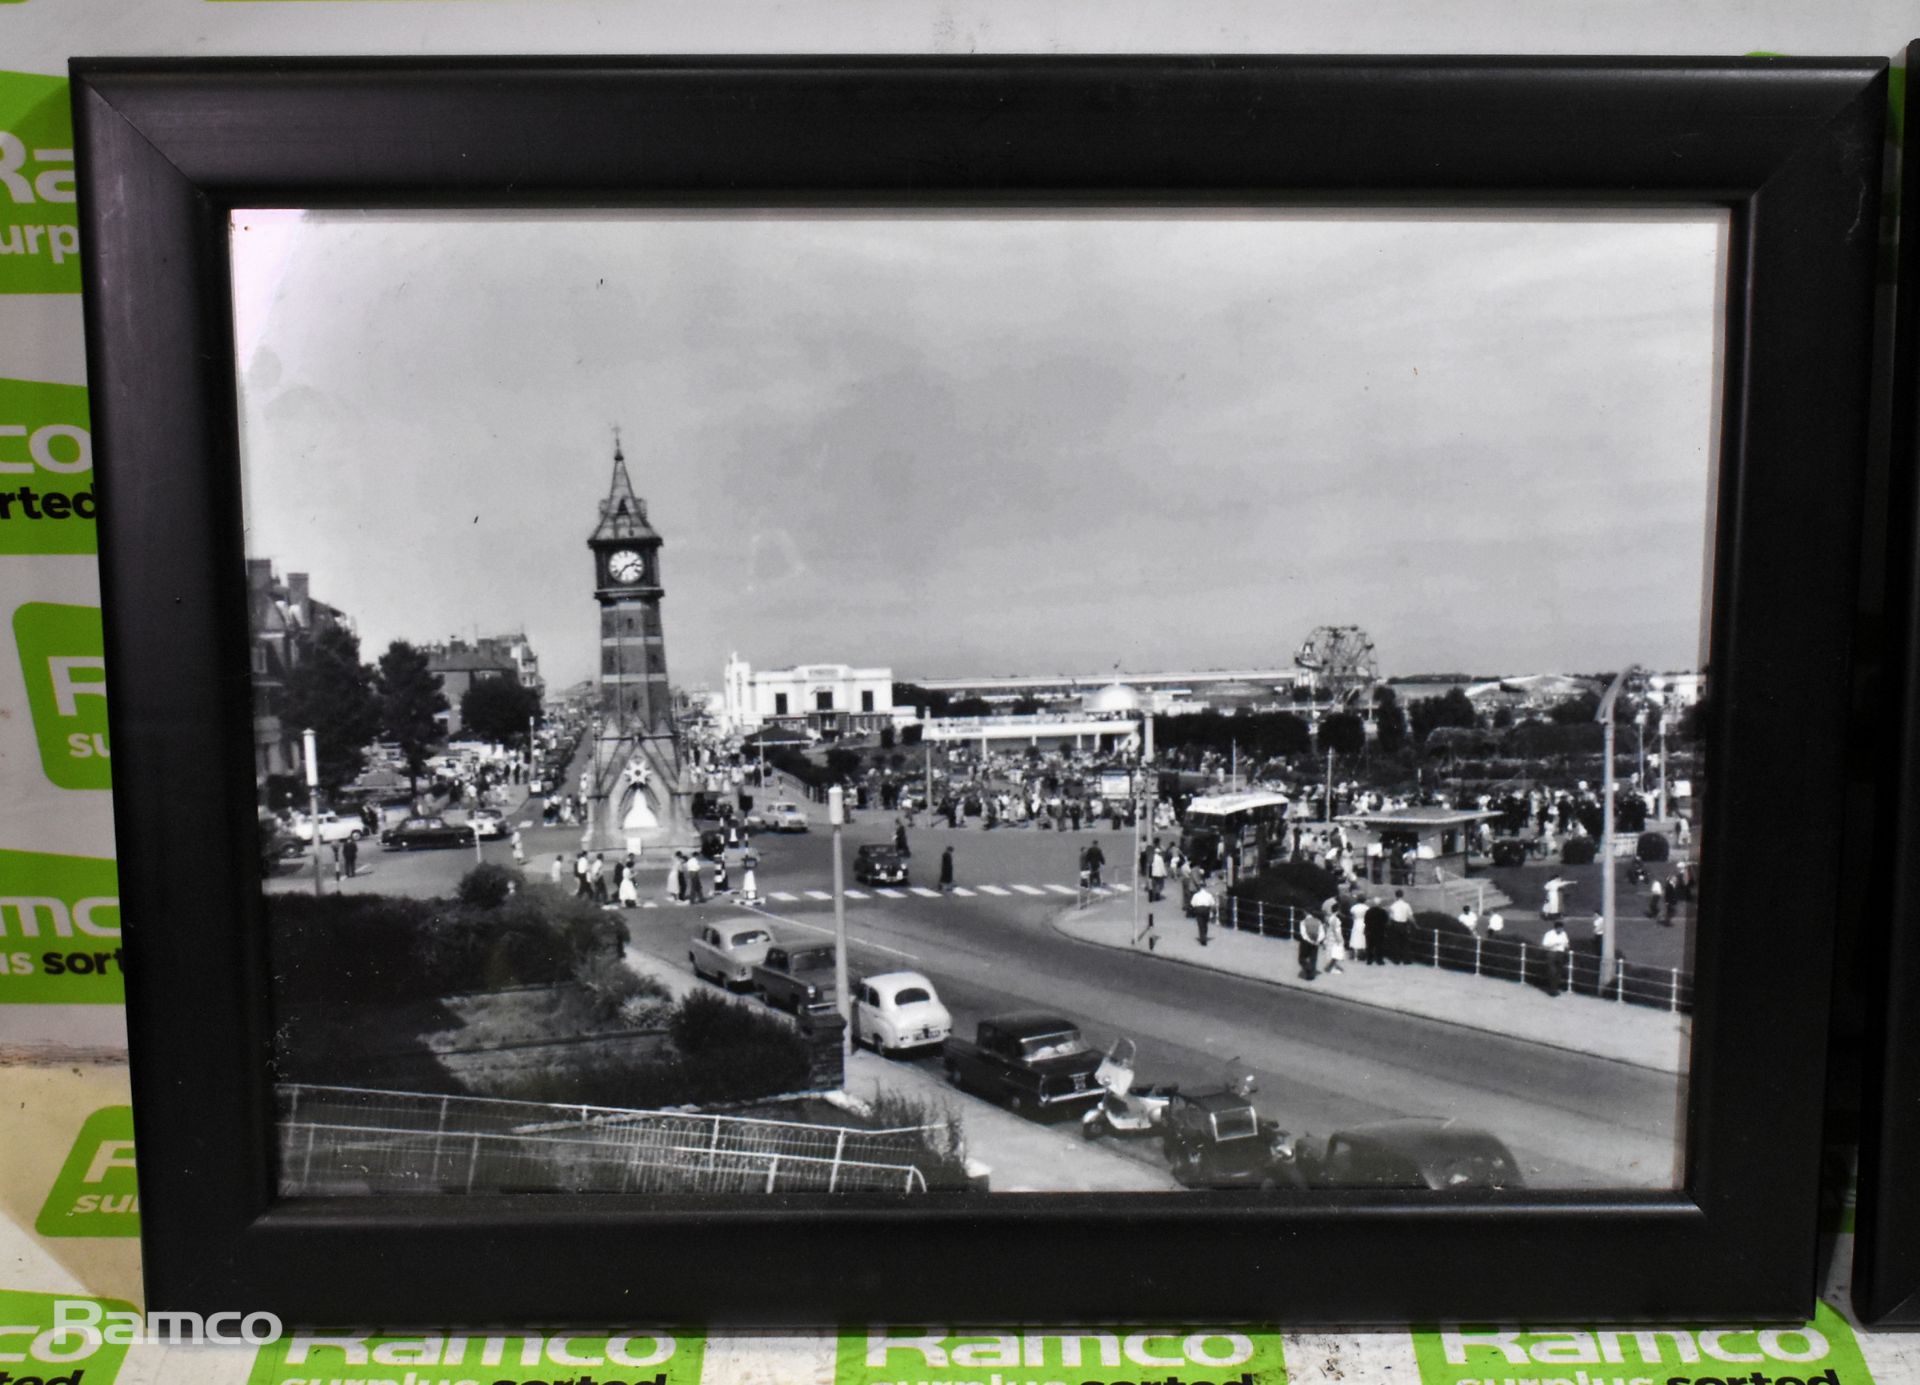 4x Skegness memorabilia photos - Clock Tower and Grande Parade - frame size: 13.5 x 10 inches - Image 4 of 5